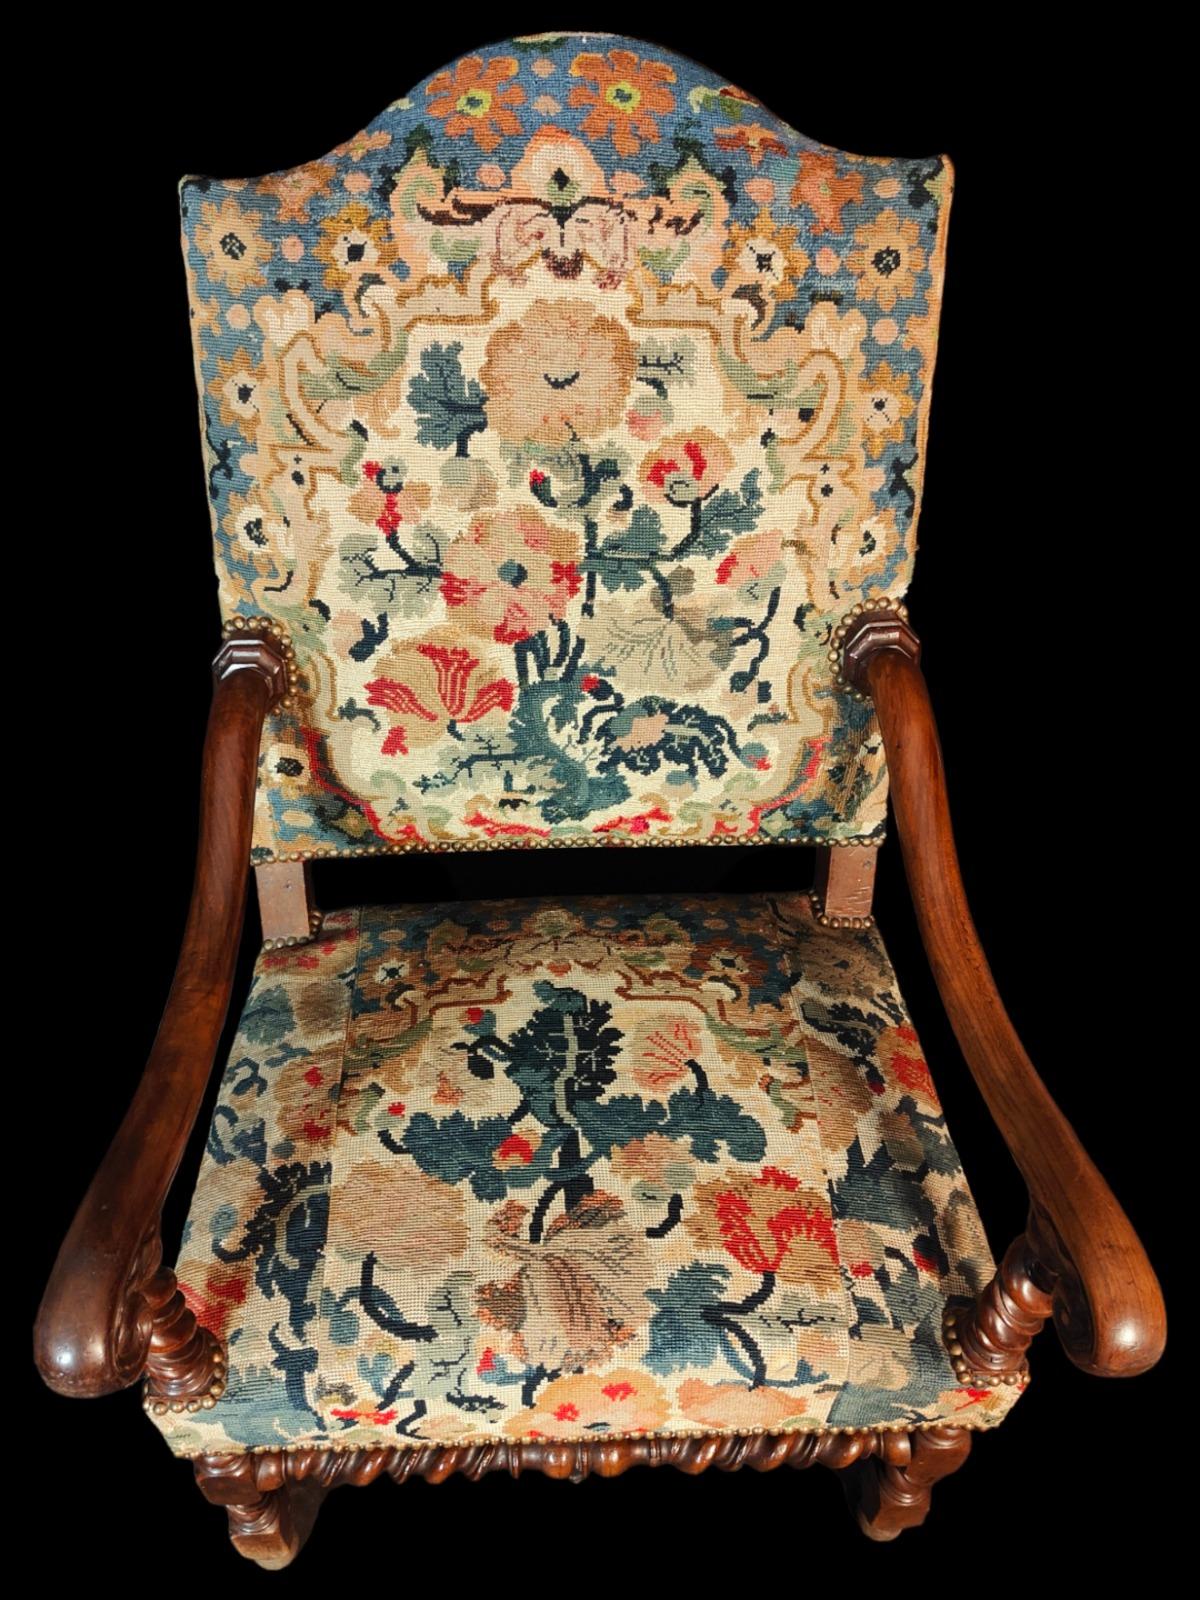 Pair Of Large Armchairs XIX Century
PAIR OF FRENCH ARMCHAIRS FROM THE XIX CENTURY WITH ITS ORIGINAL ABUSSON UPHOLSTERY. THE CONDITION IS VERY GOOD. MEASURES: 112X65X60 CM